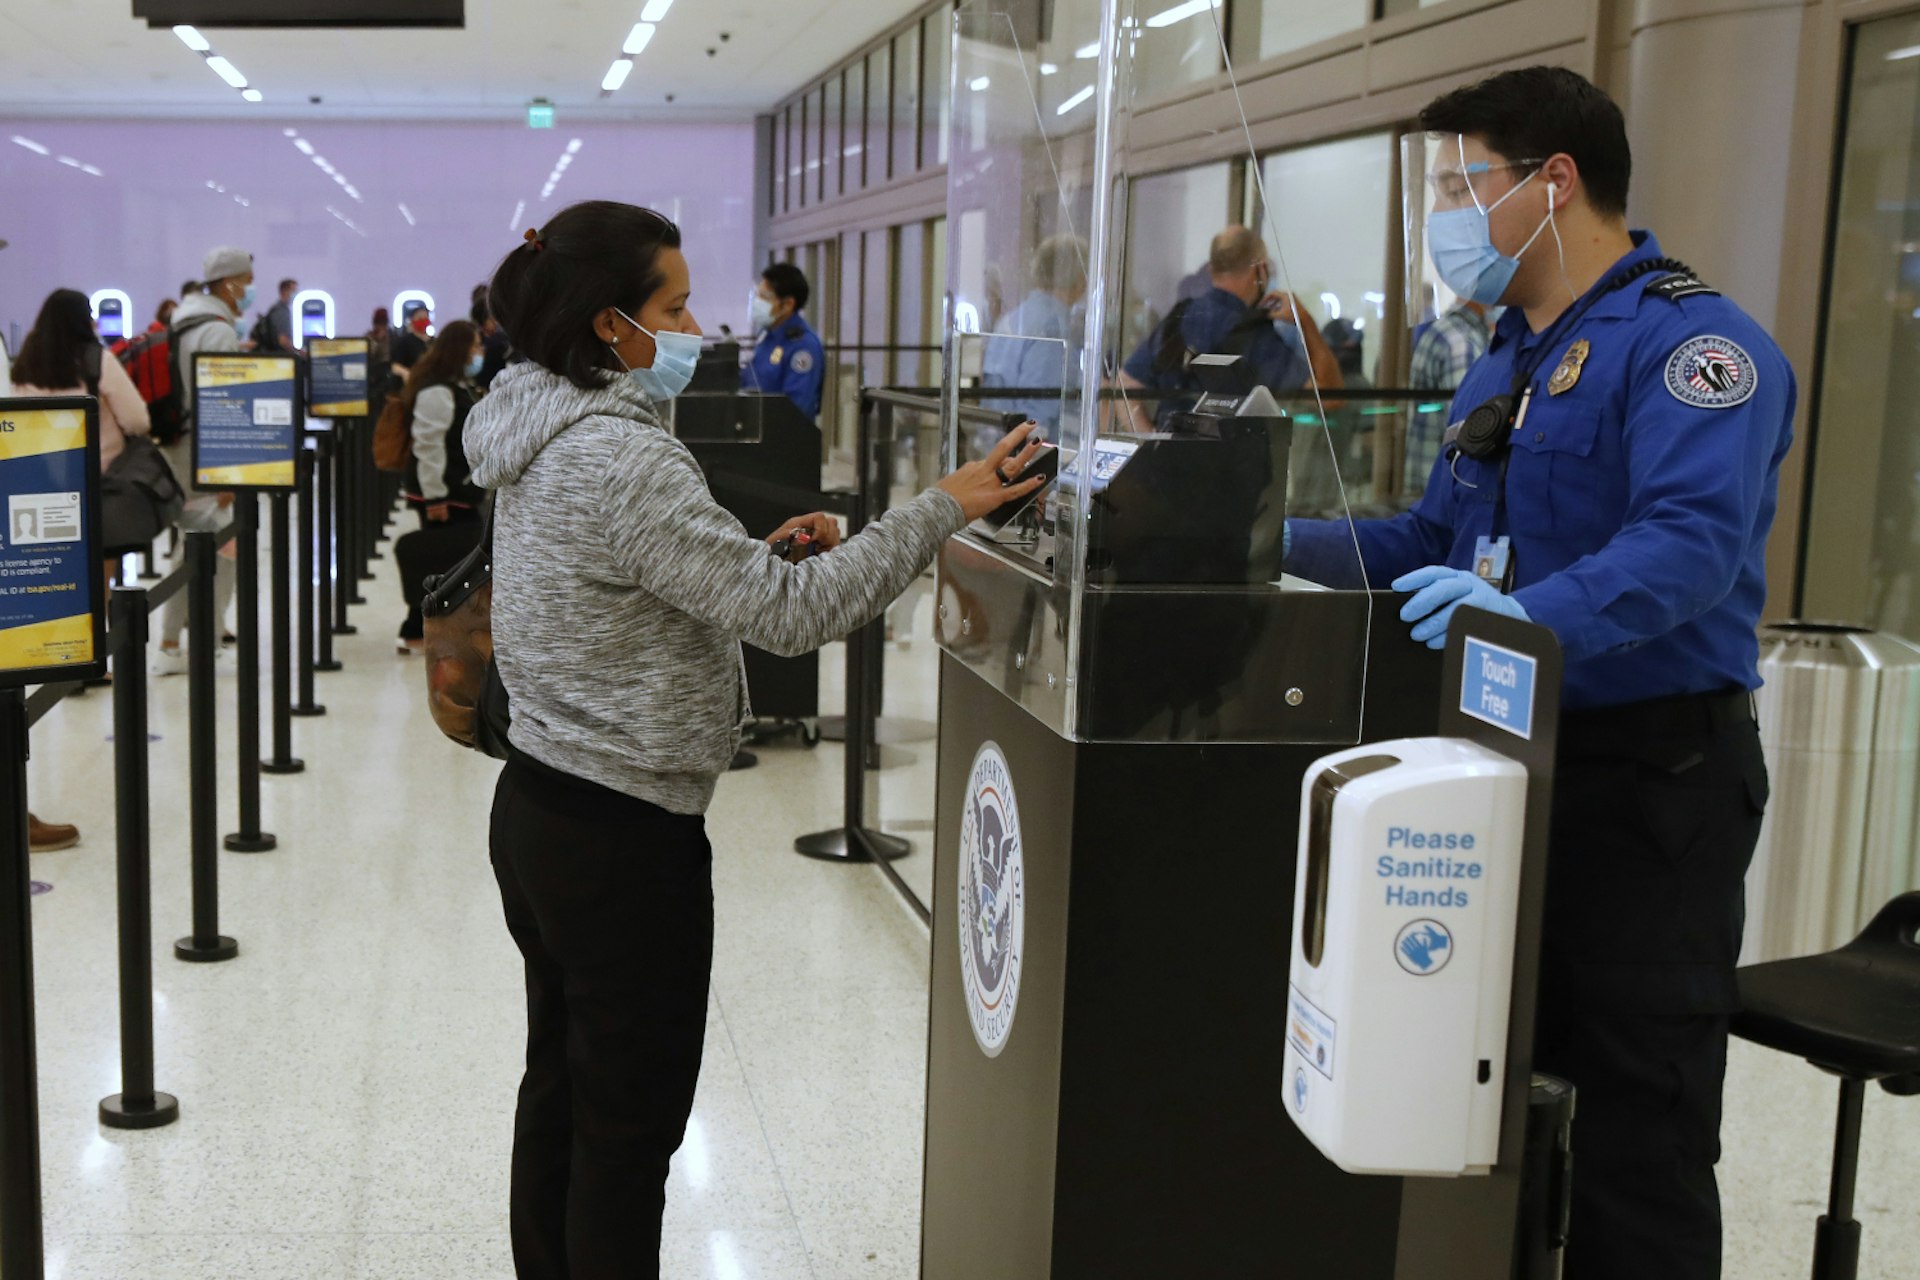 A woman having her documents checked at a TSA checkpoint at an airport